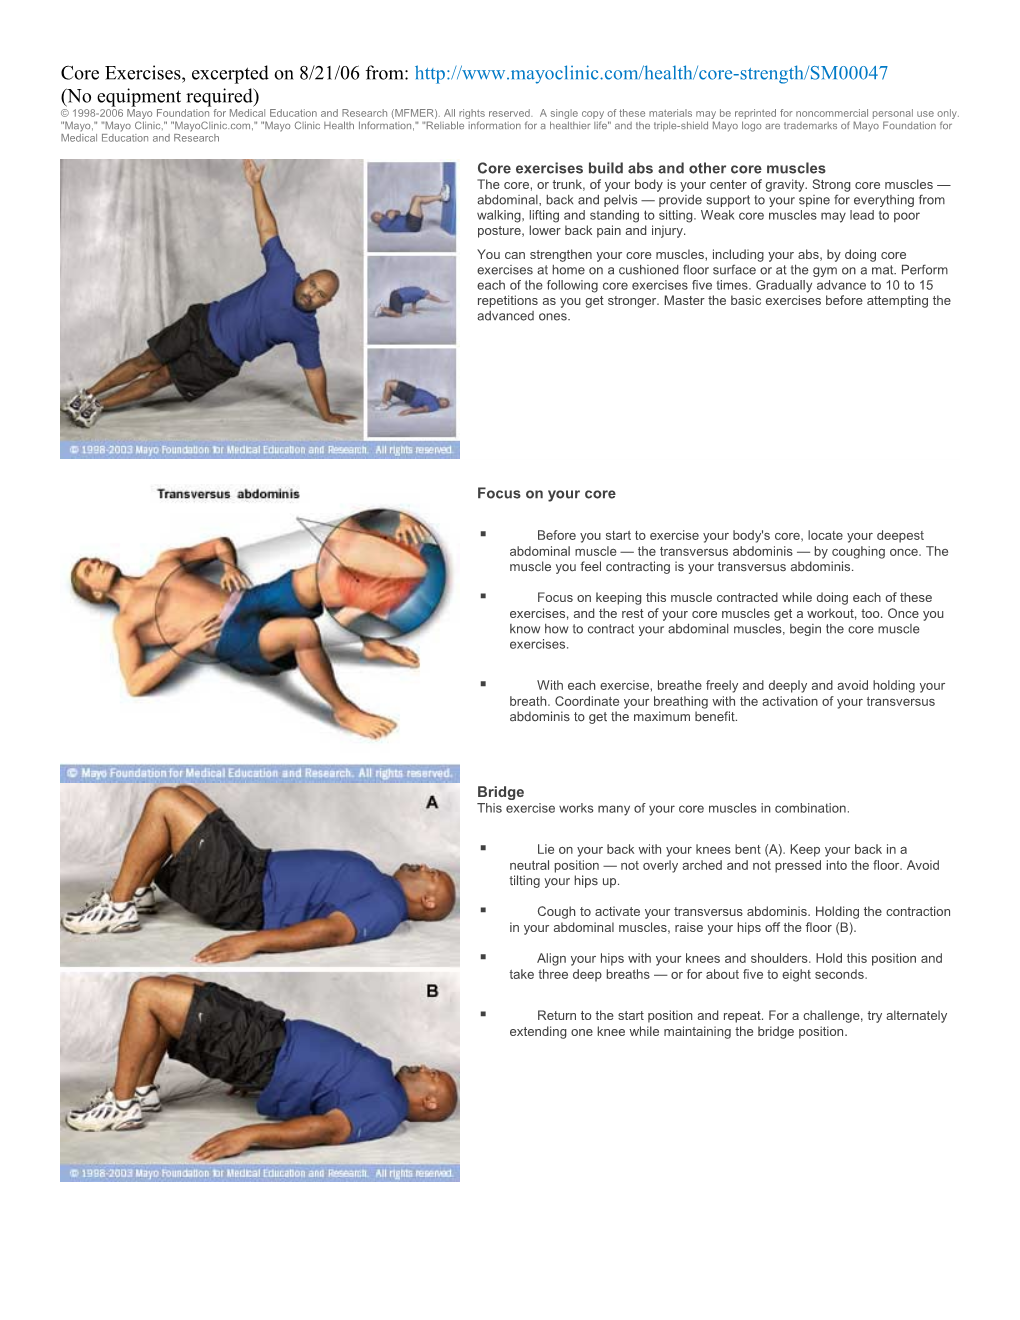 Core Exercises, Excerpted on 8/21/06 From